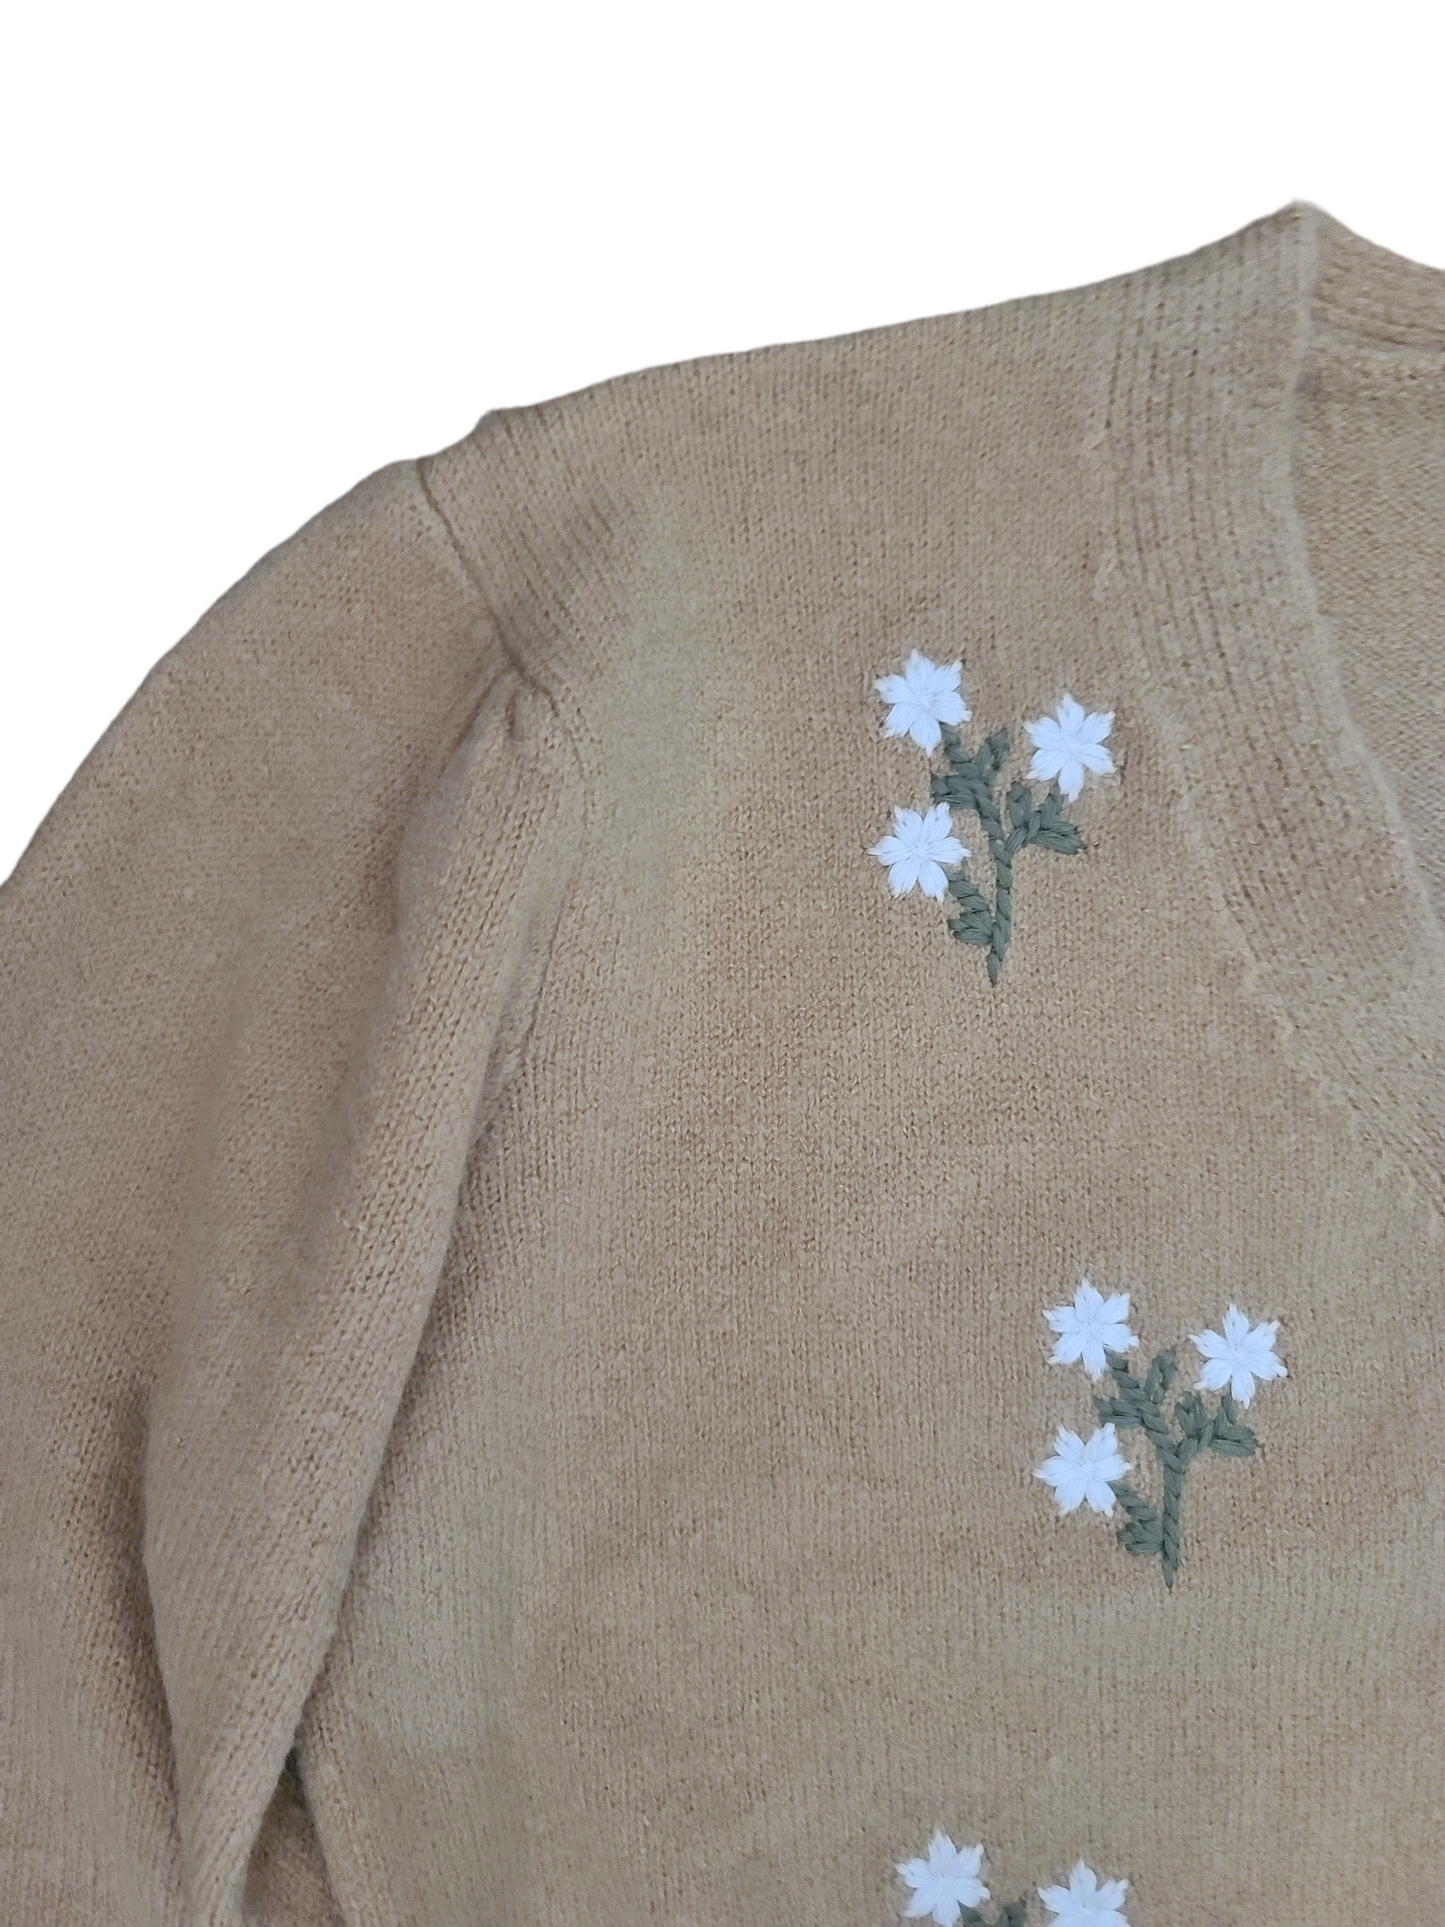 Vintage embroidered brown cottagecore cardigan with puff sleeves